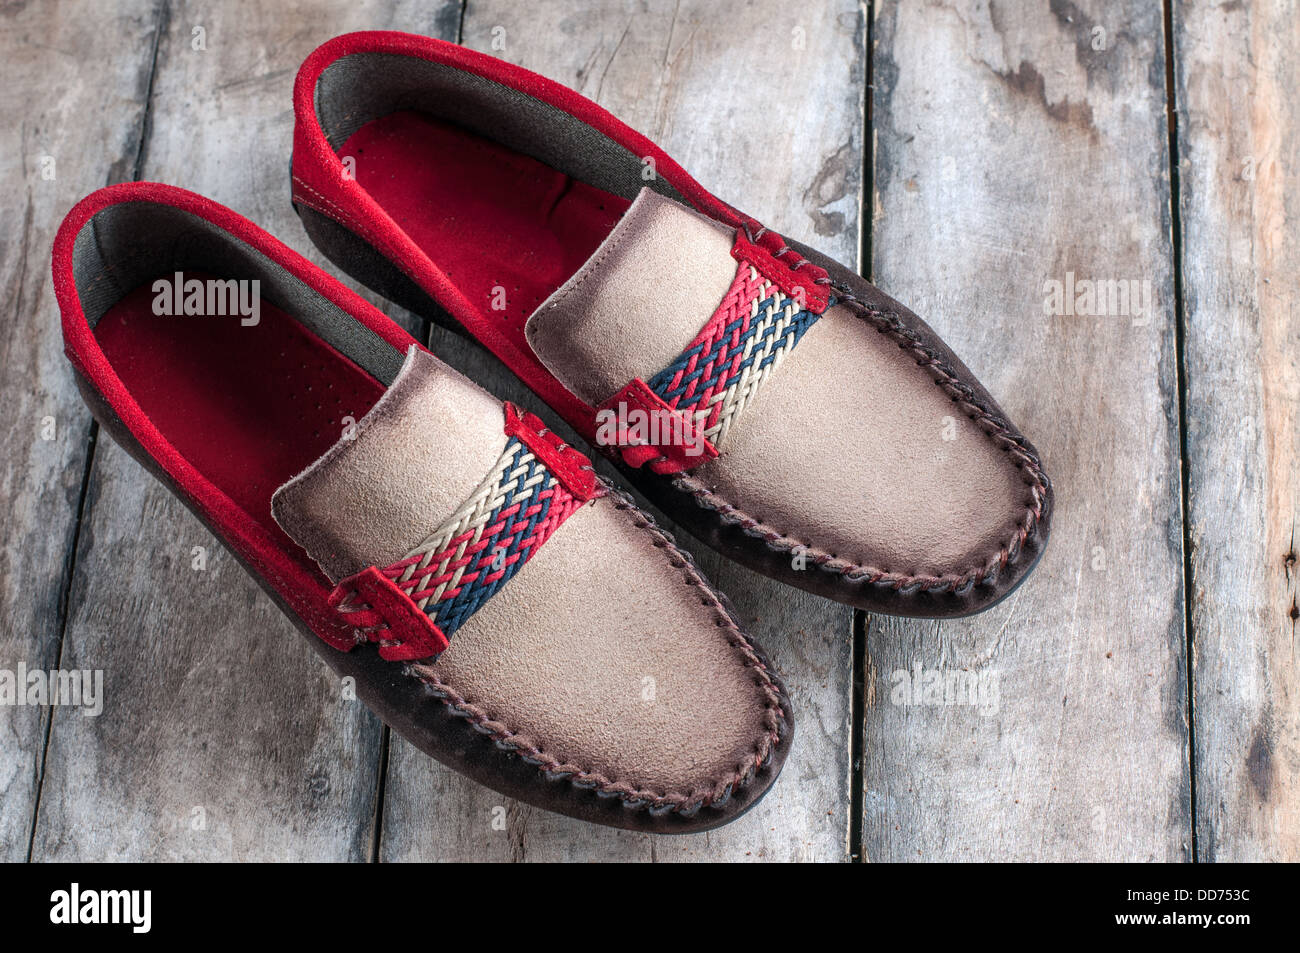 fashion shoes for men on old wooden plank Stock Photo